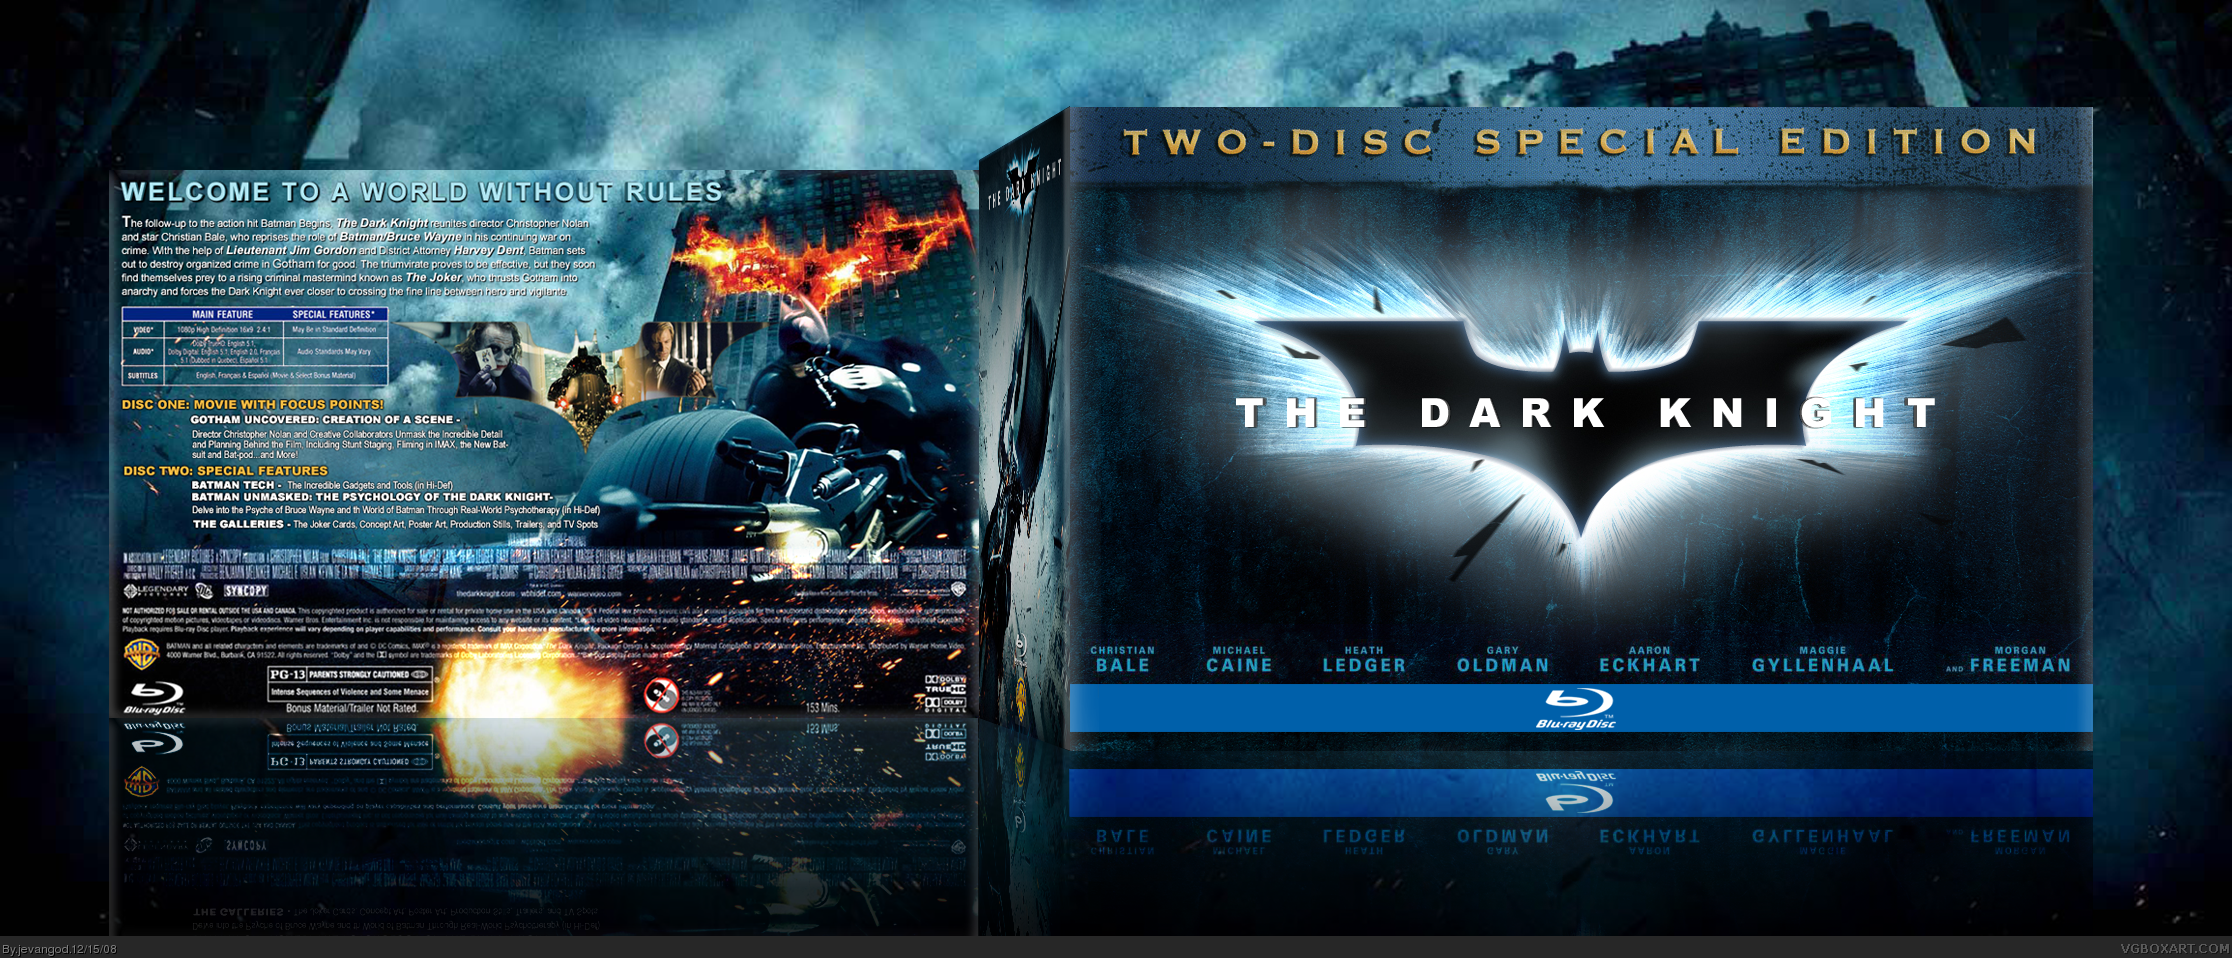 The Dark Knight Limited Edition box cover